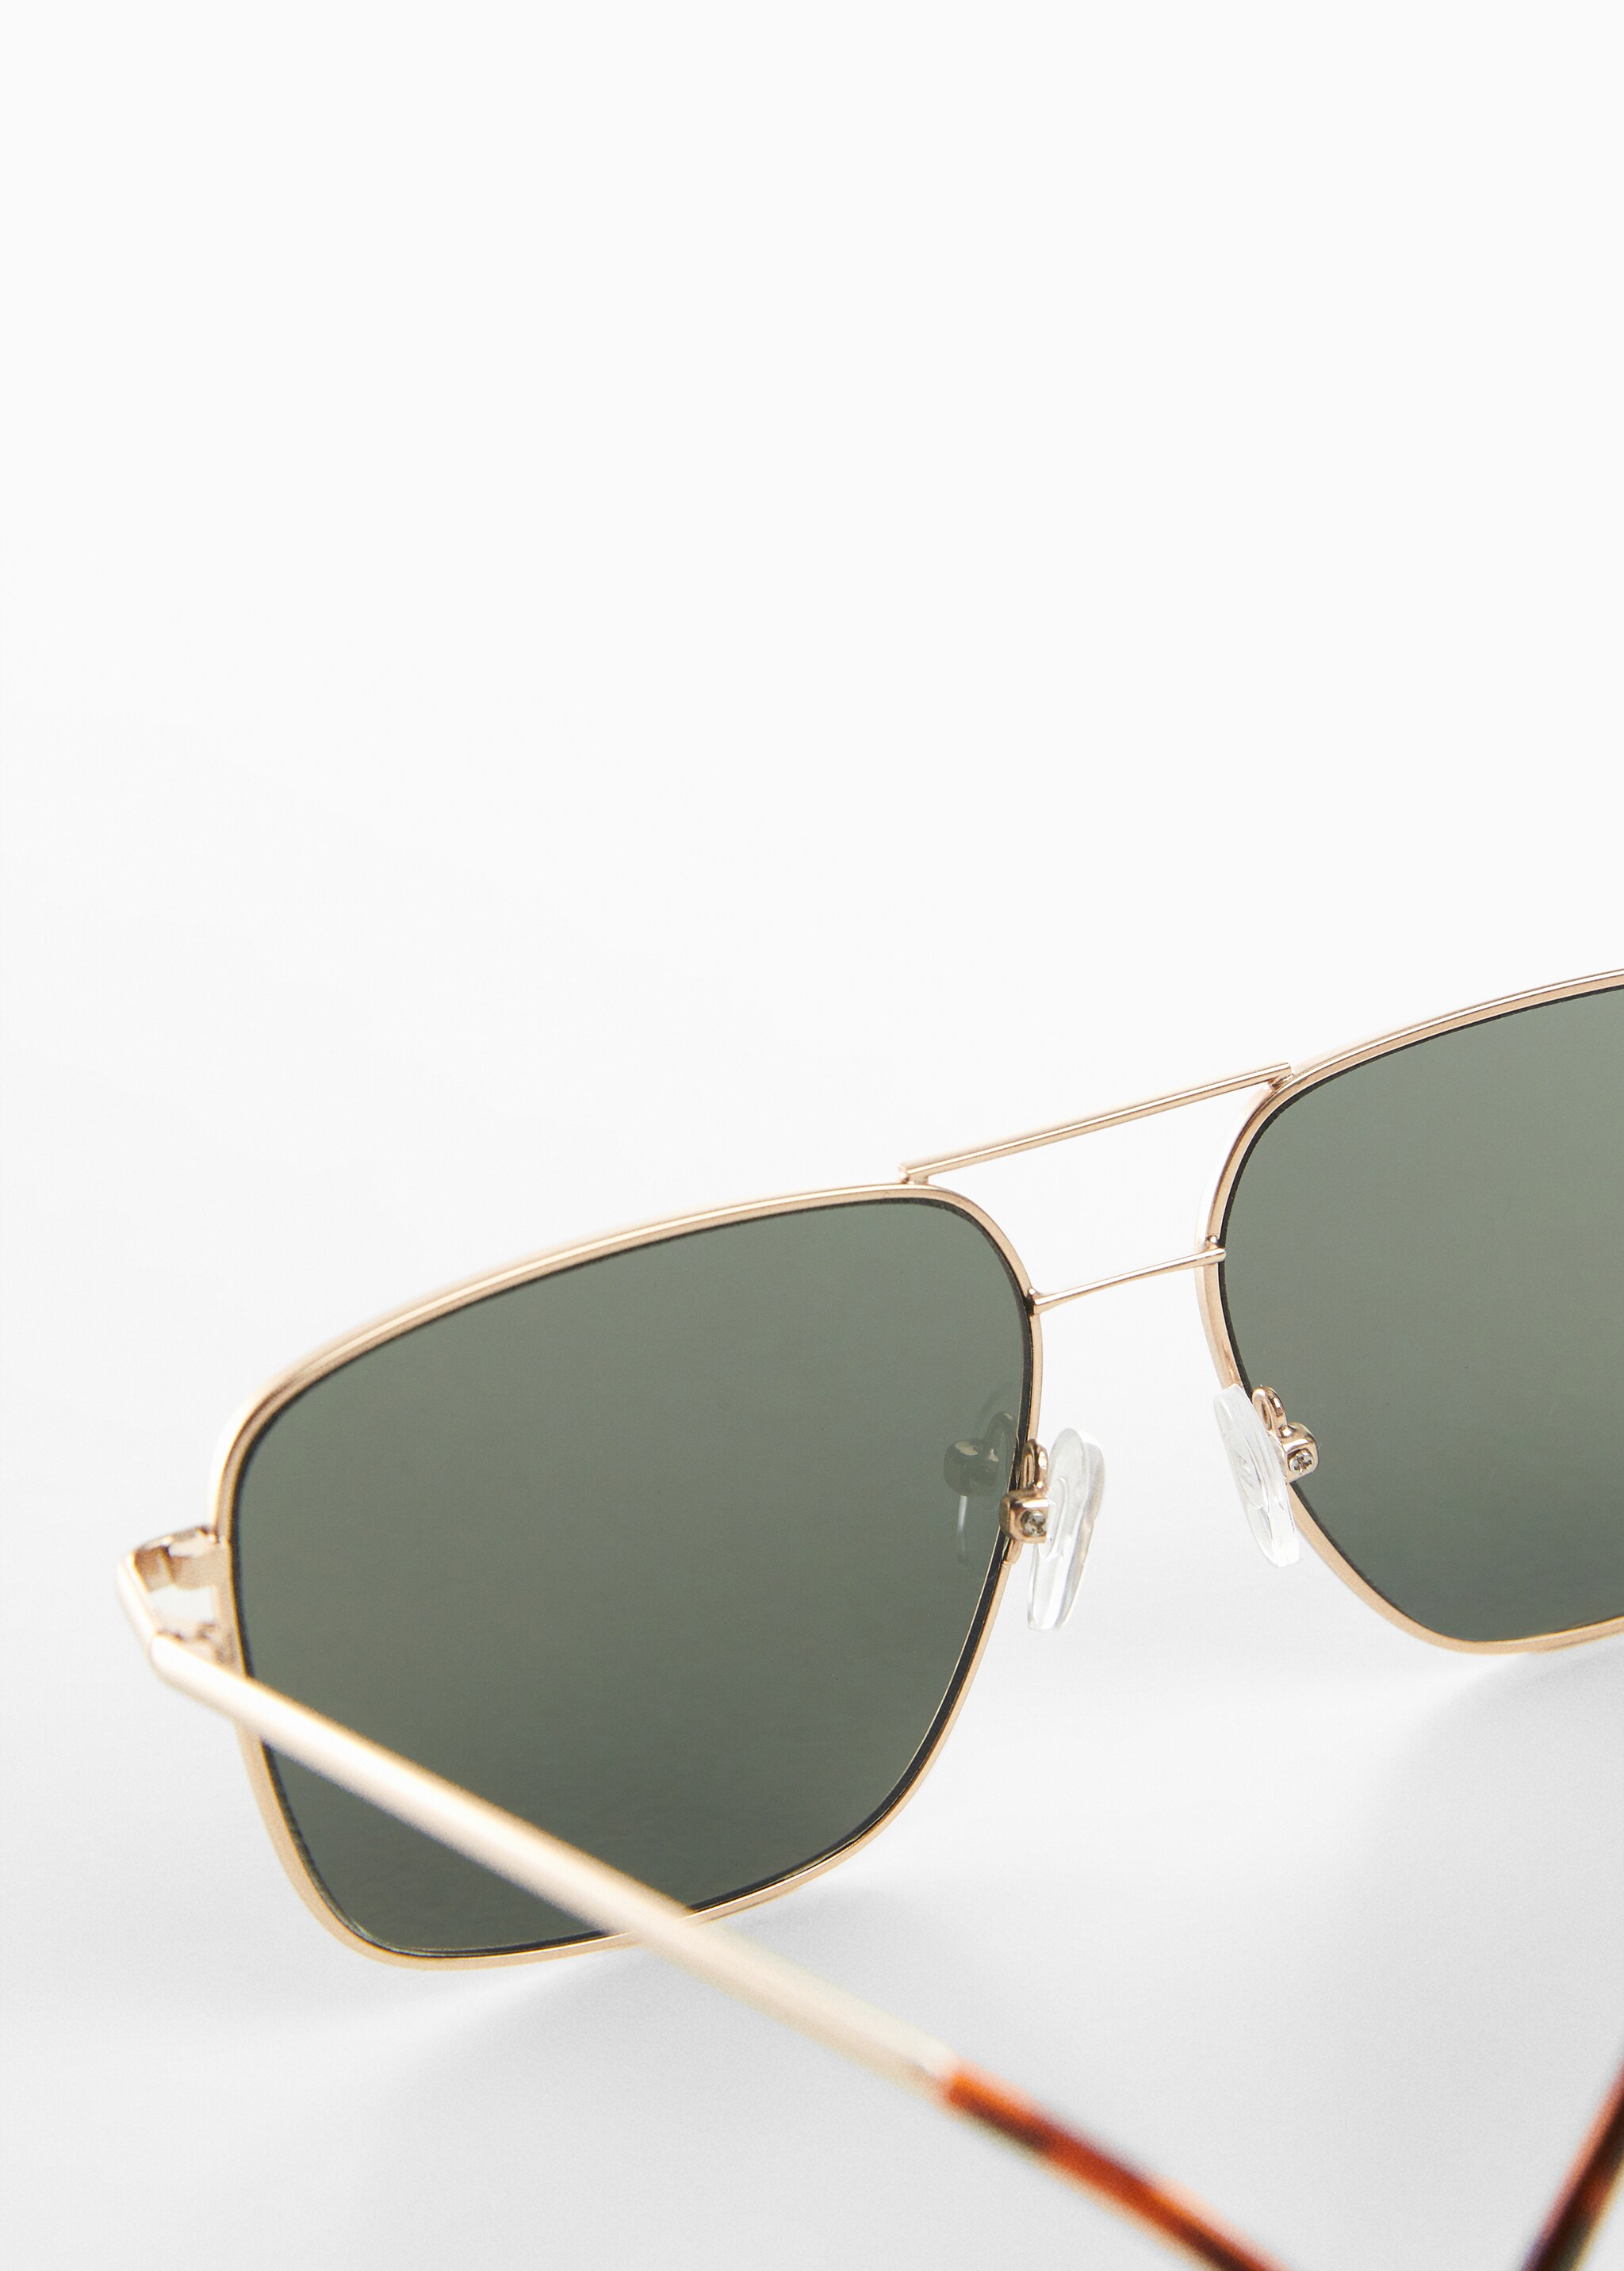 Aviator sunglasses - Details of the article 1